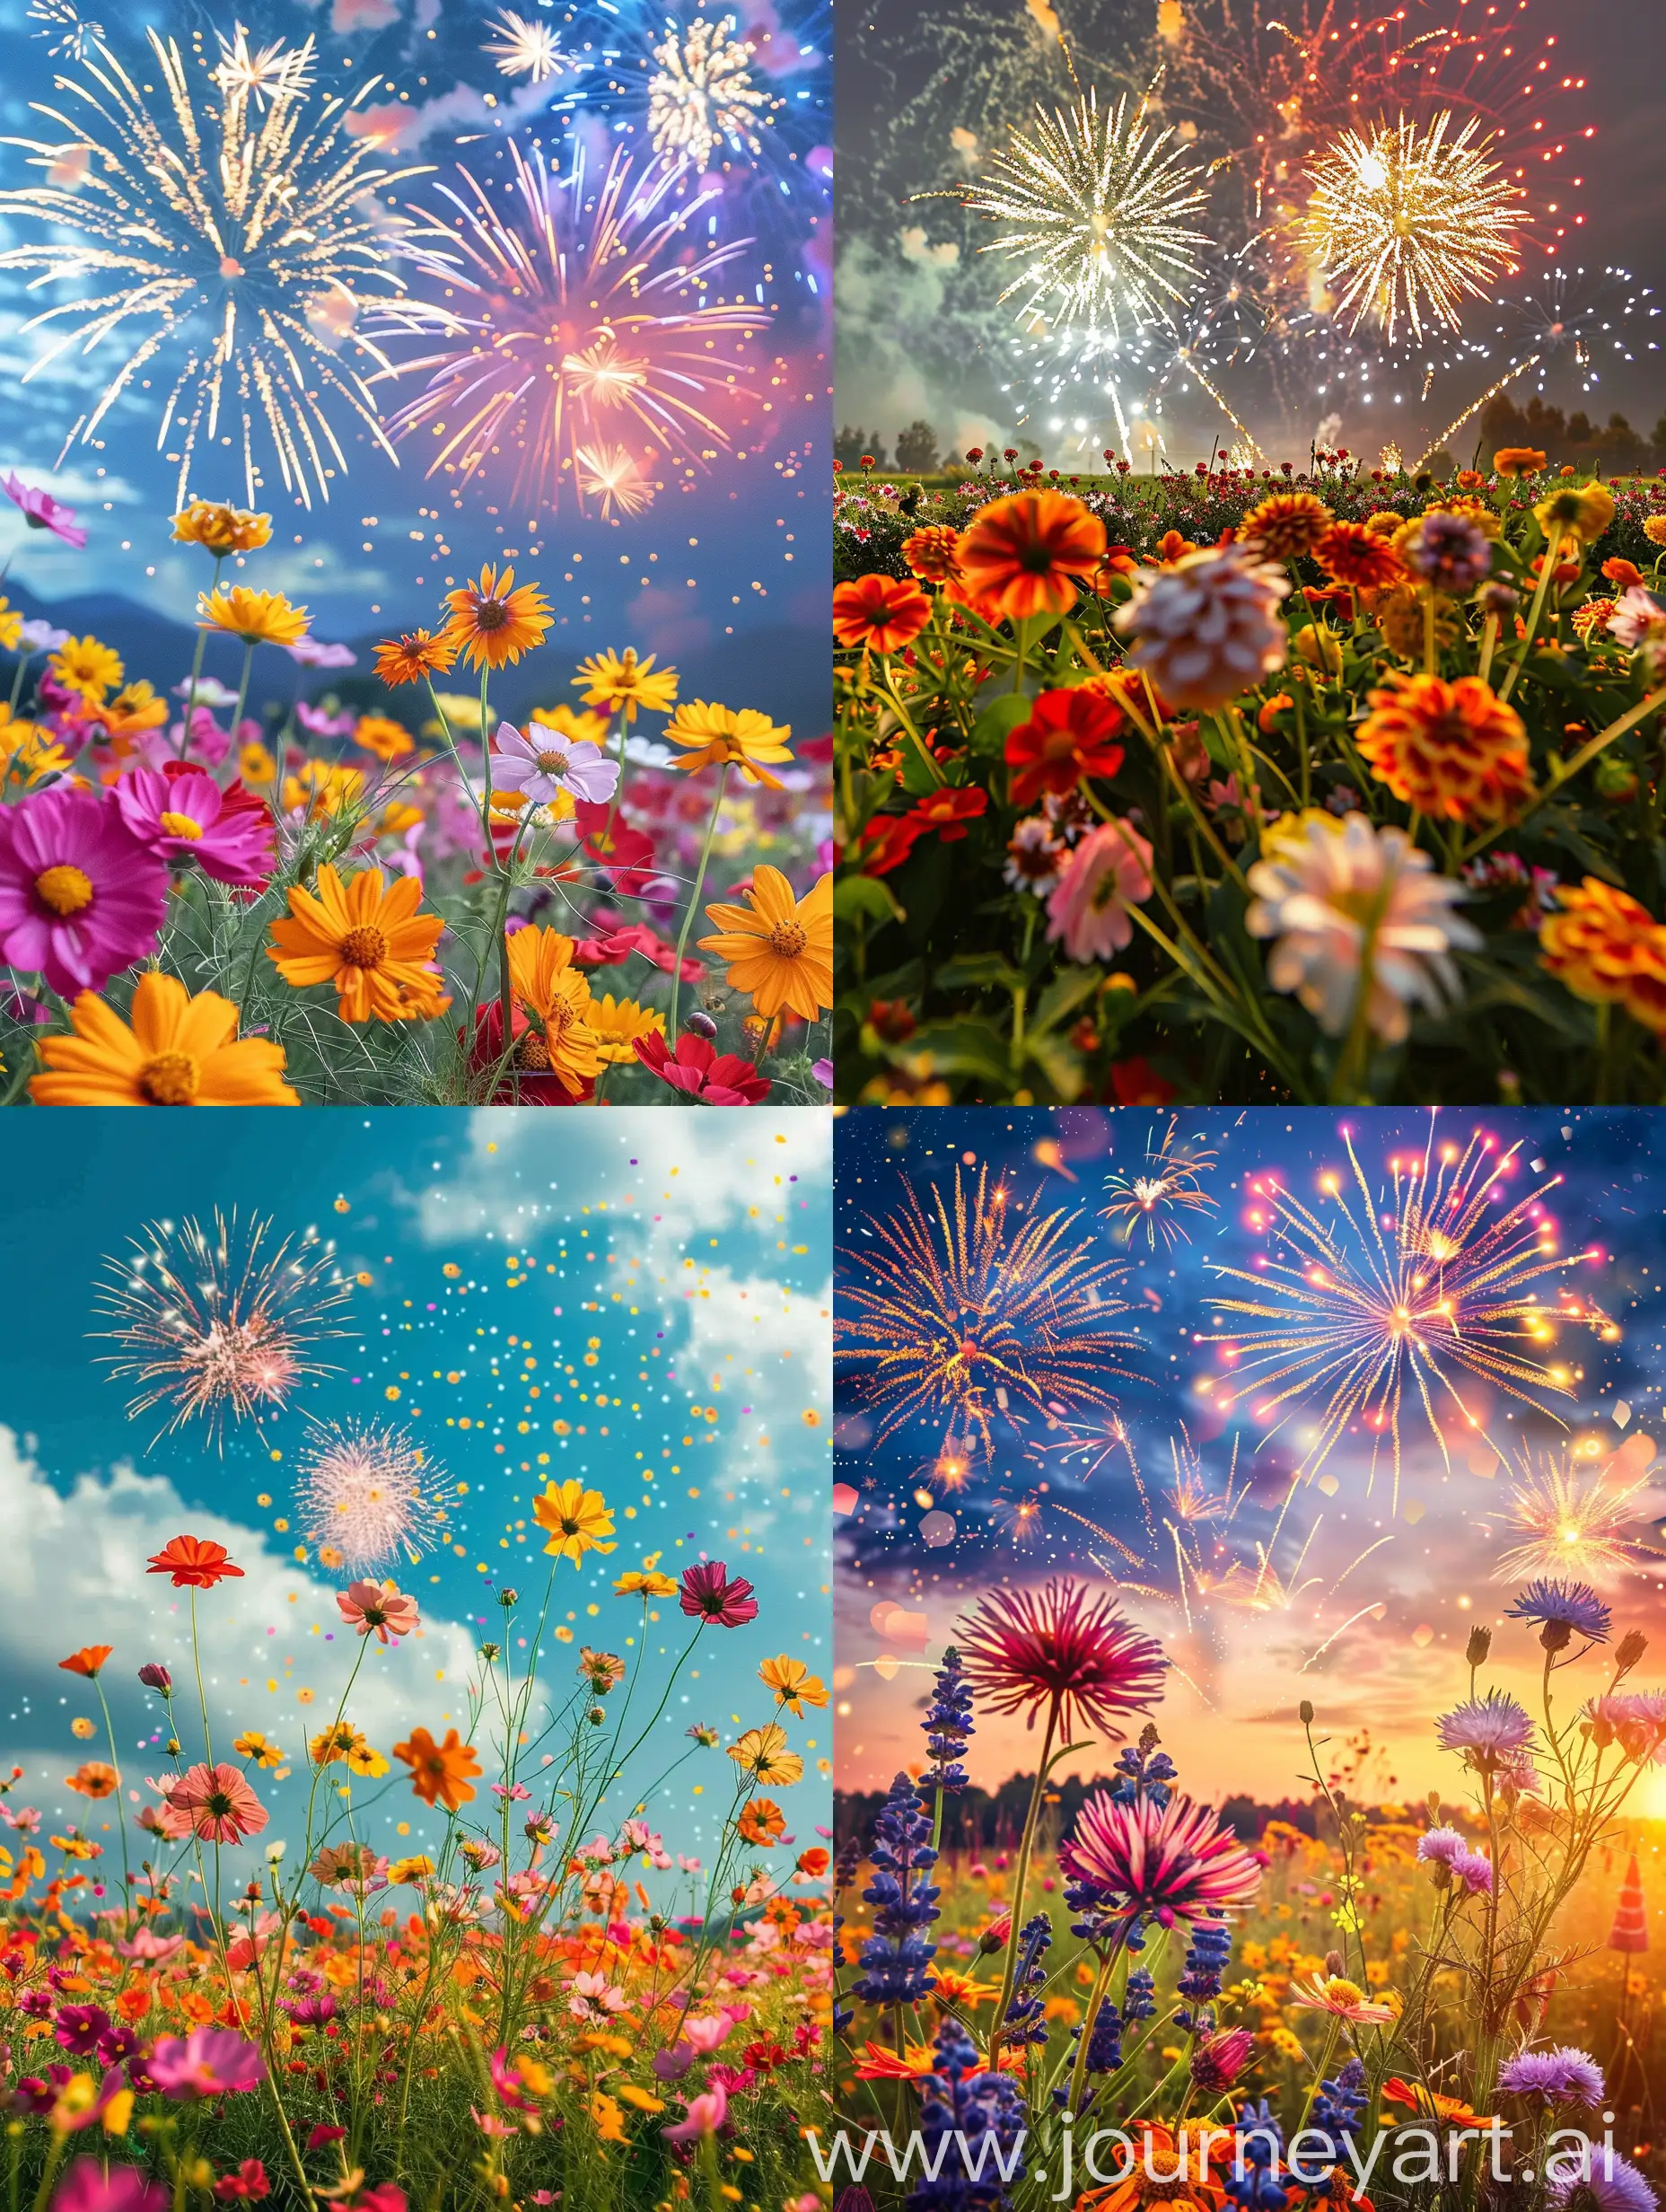 Holiday, fireworks in the sky, flowers in the foreground, a field of bright flowers